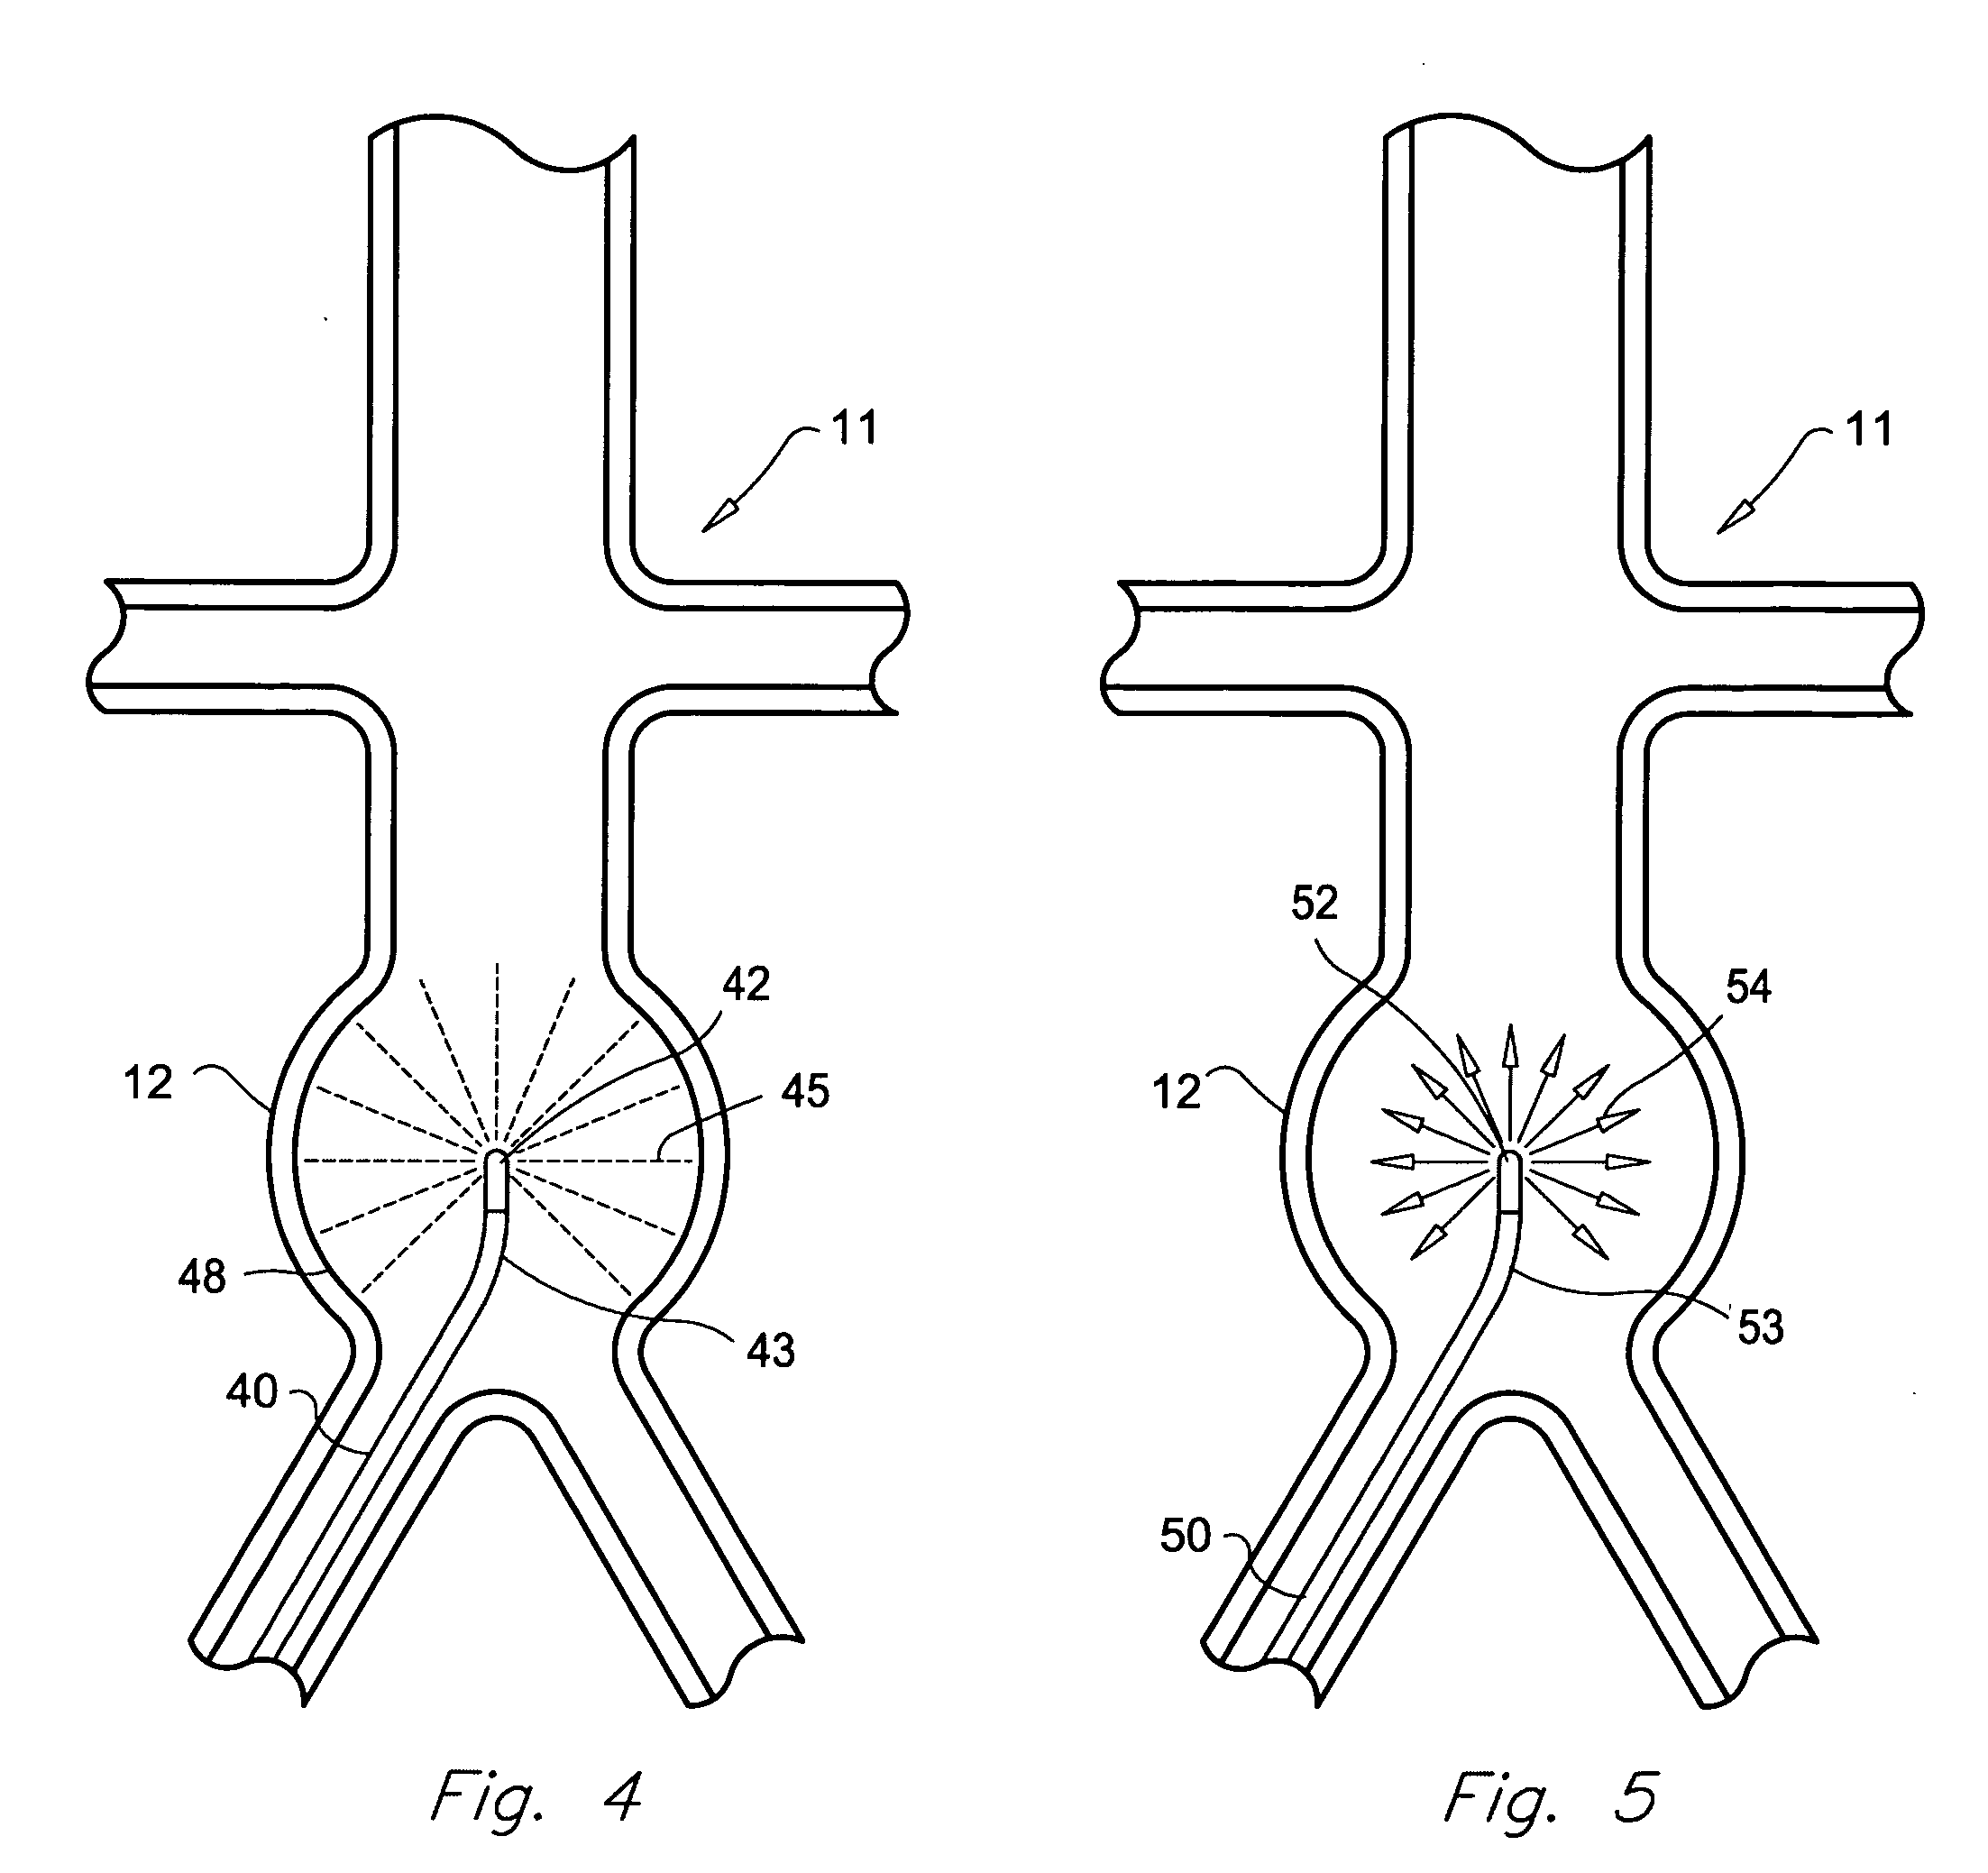 Method for treatment of aneurysms